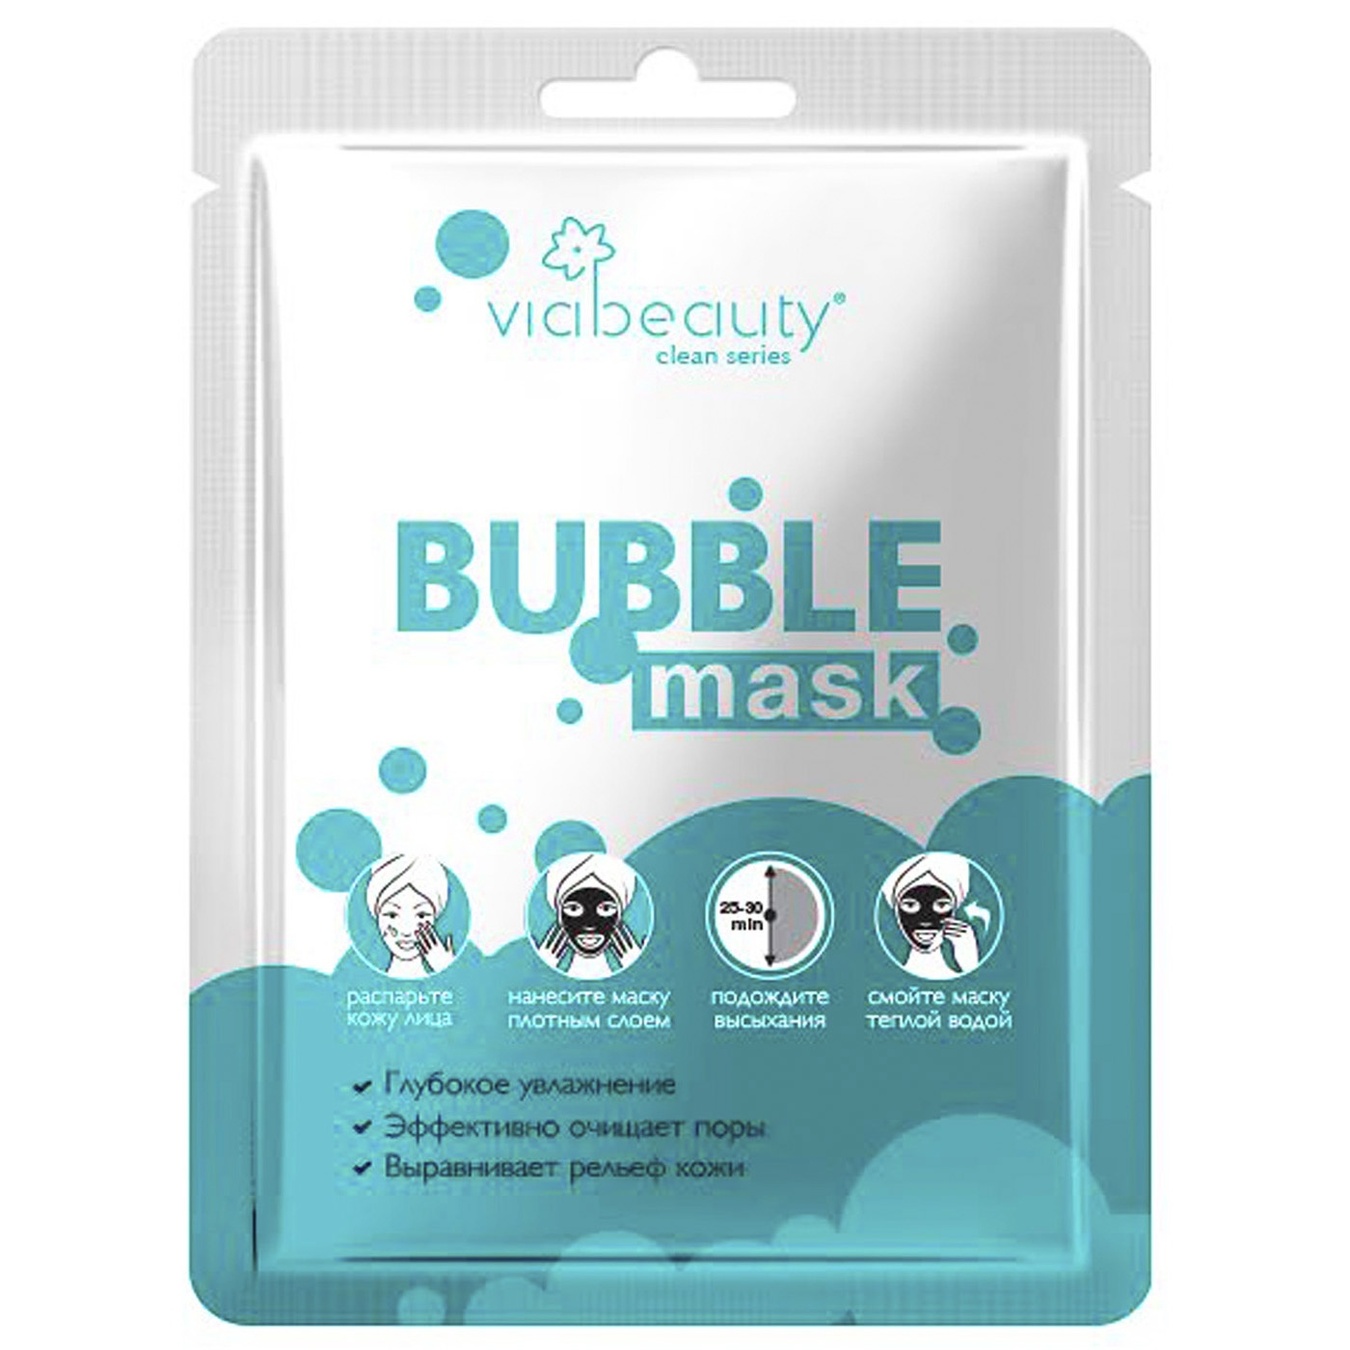 VIABEAUTY cleansing bubble mask with hyaluronic acid